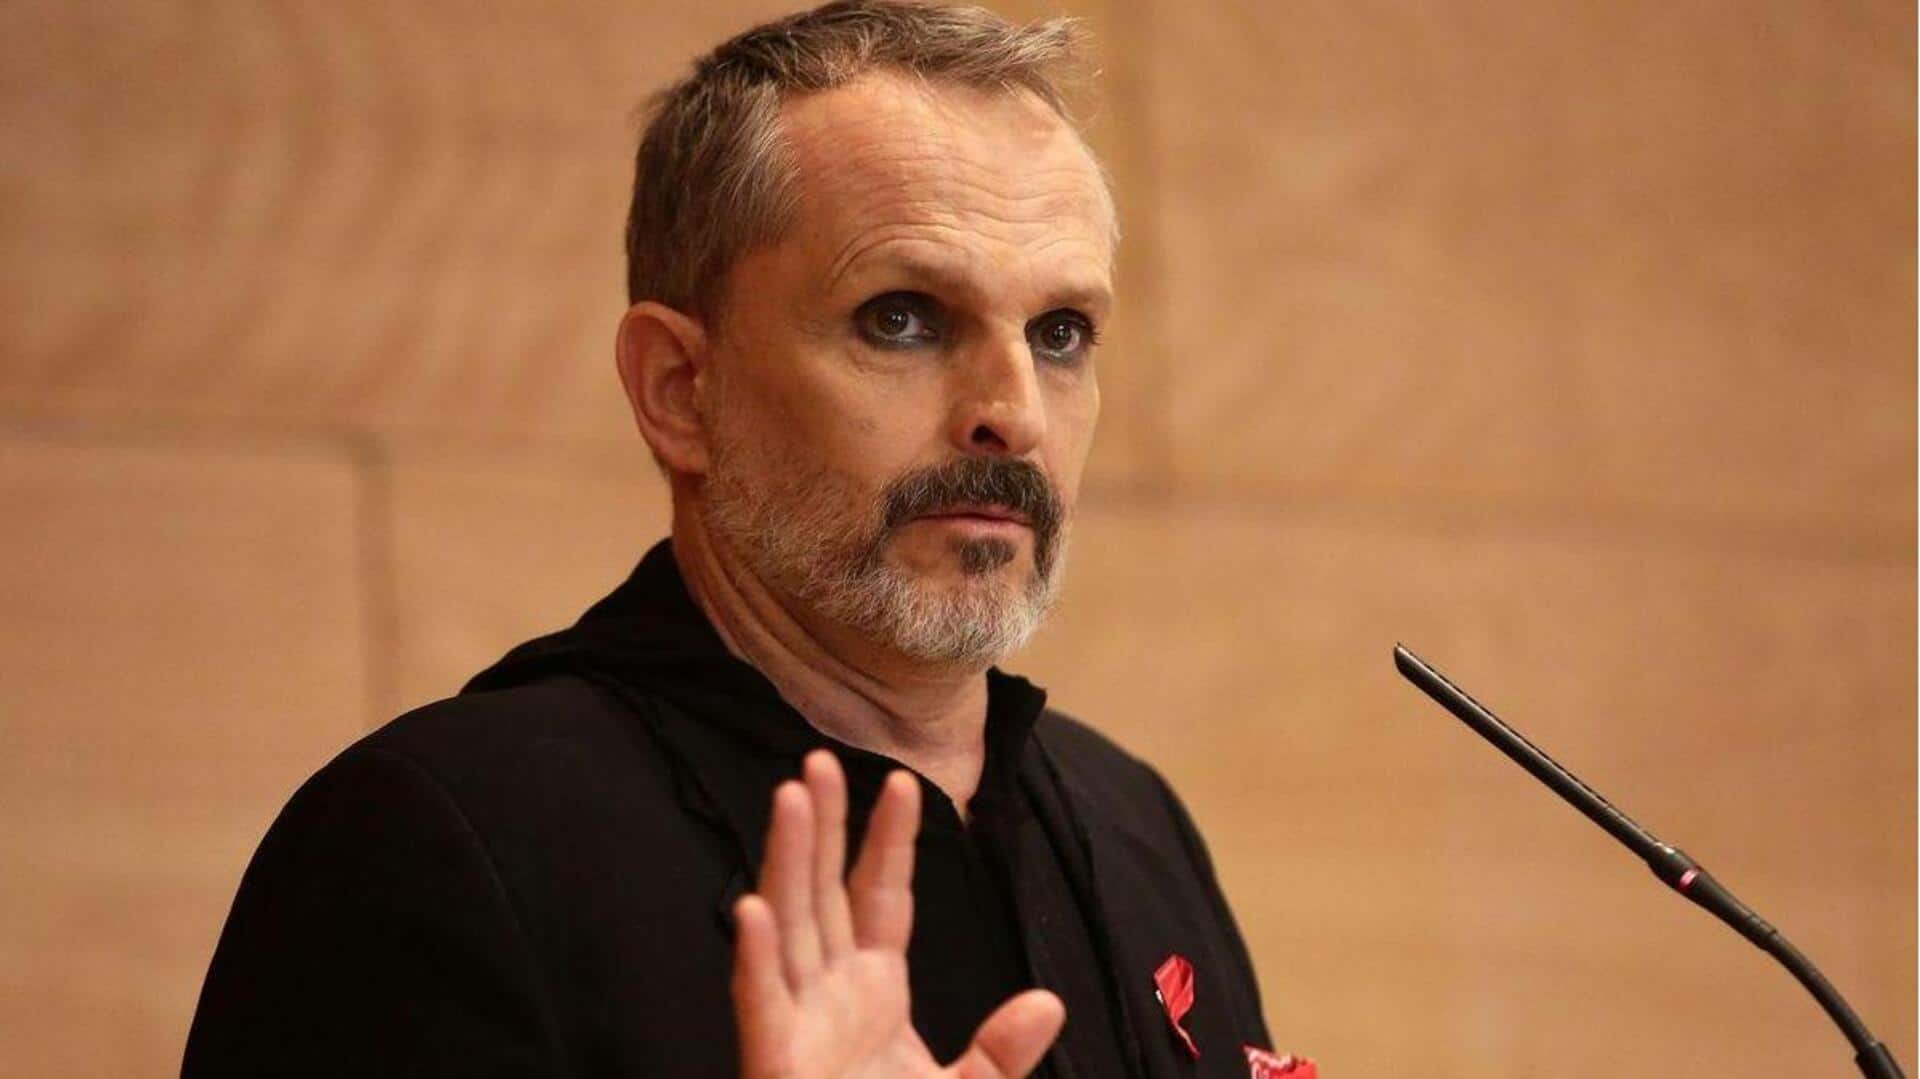 How was Spanish singer Miguel Bosé assaulted at home